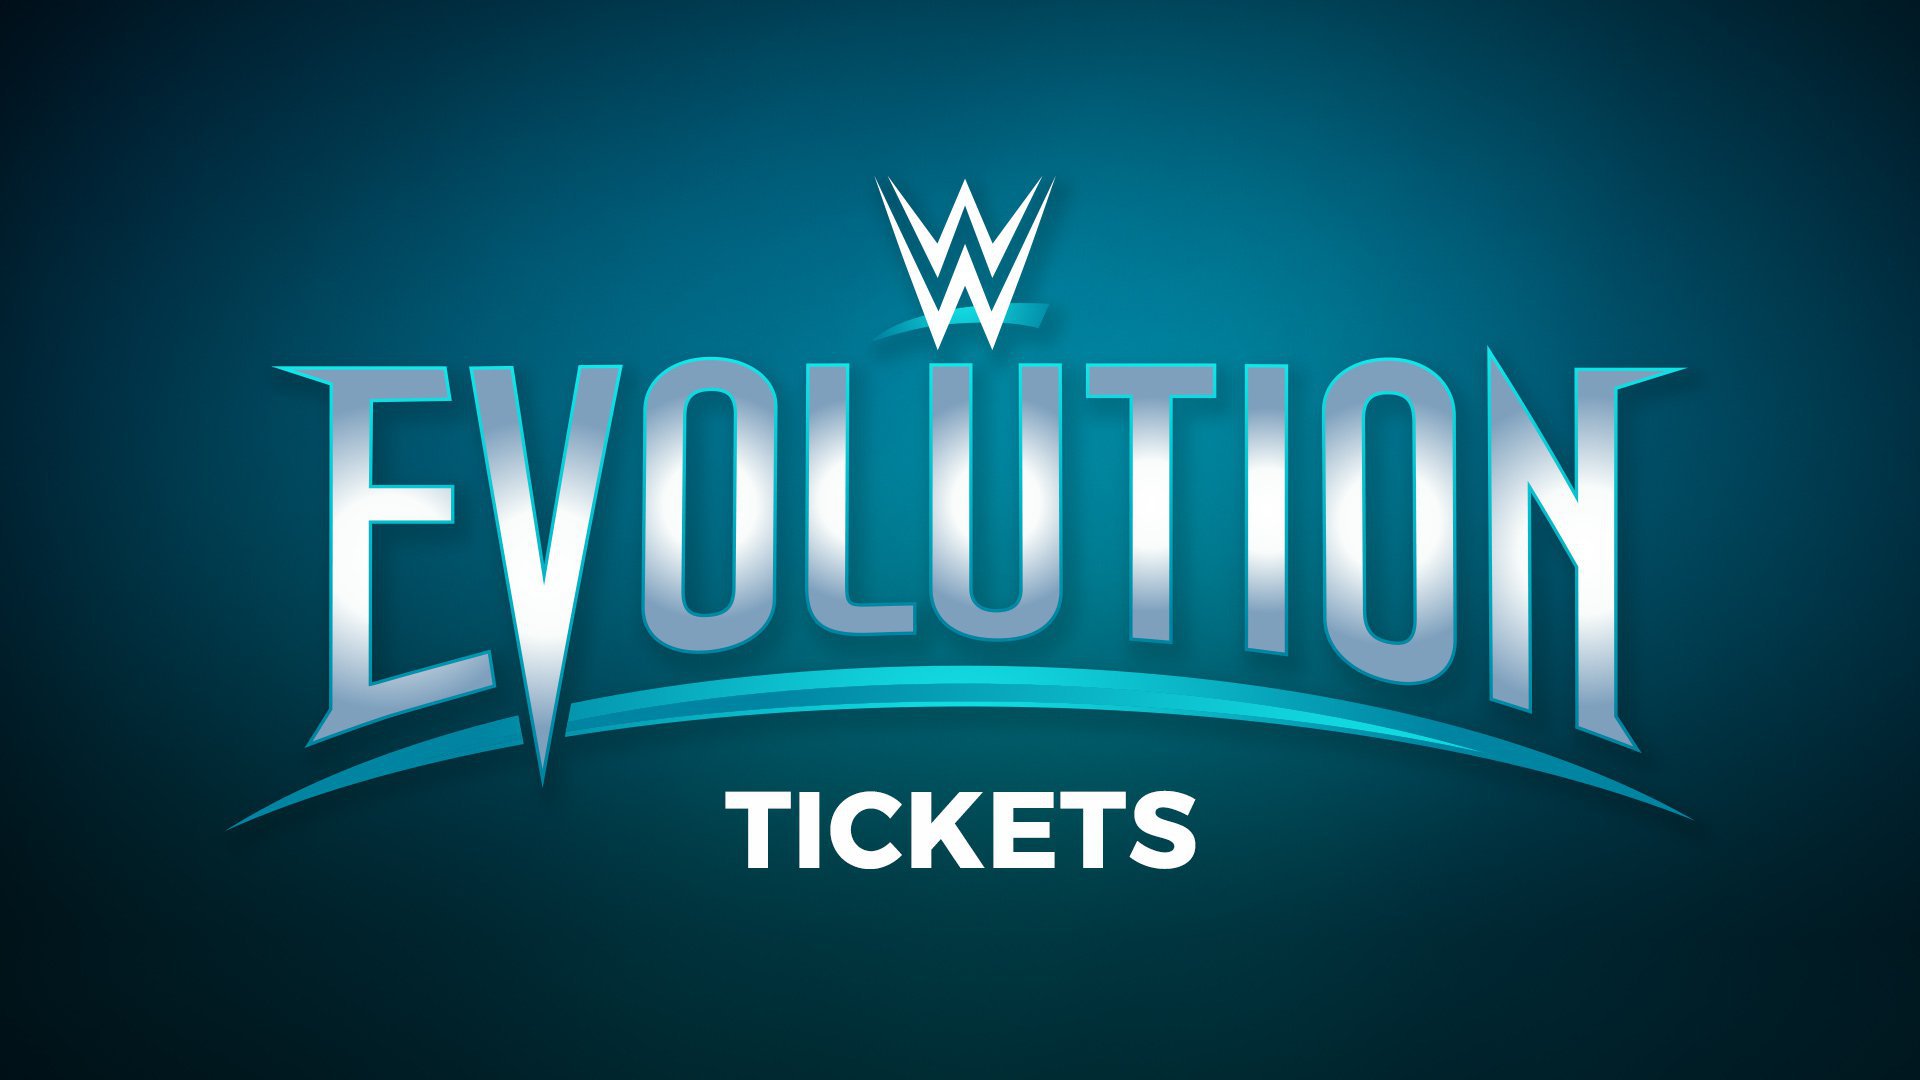 Get your tickets now to the historic firstever WWE Evolution payper